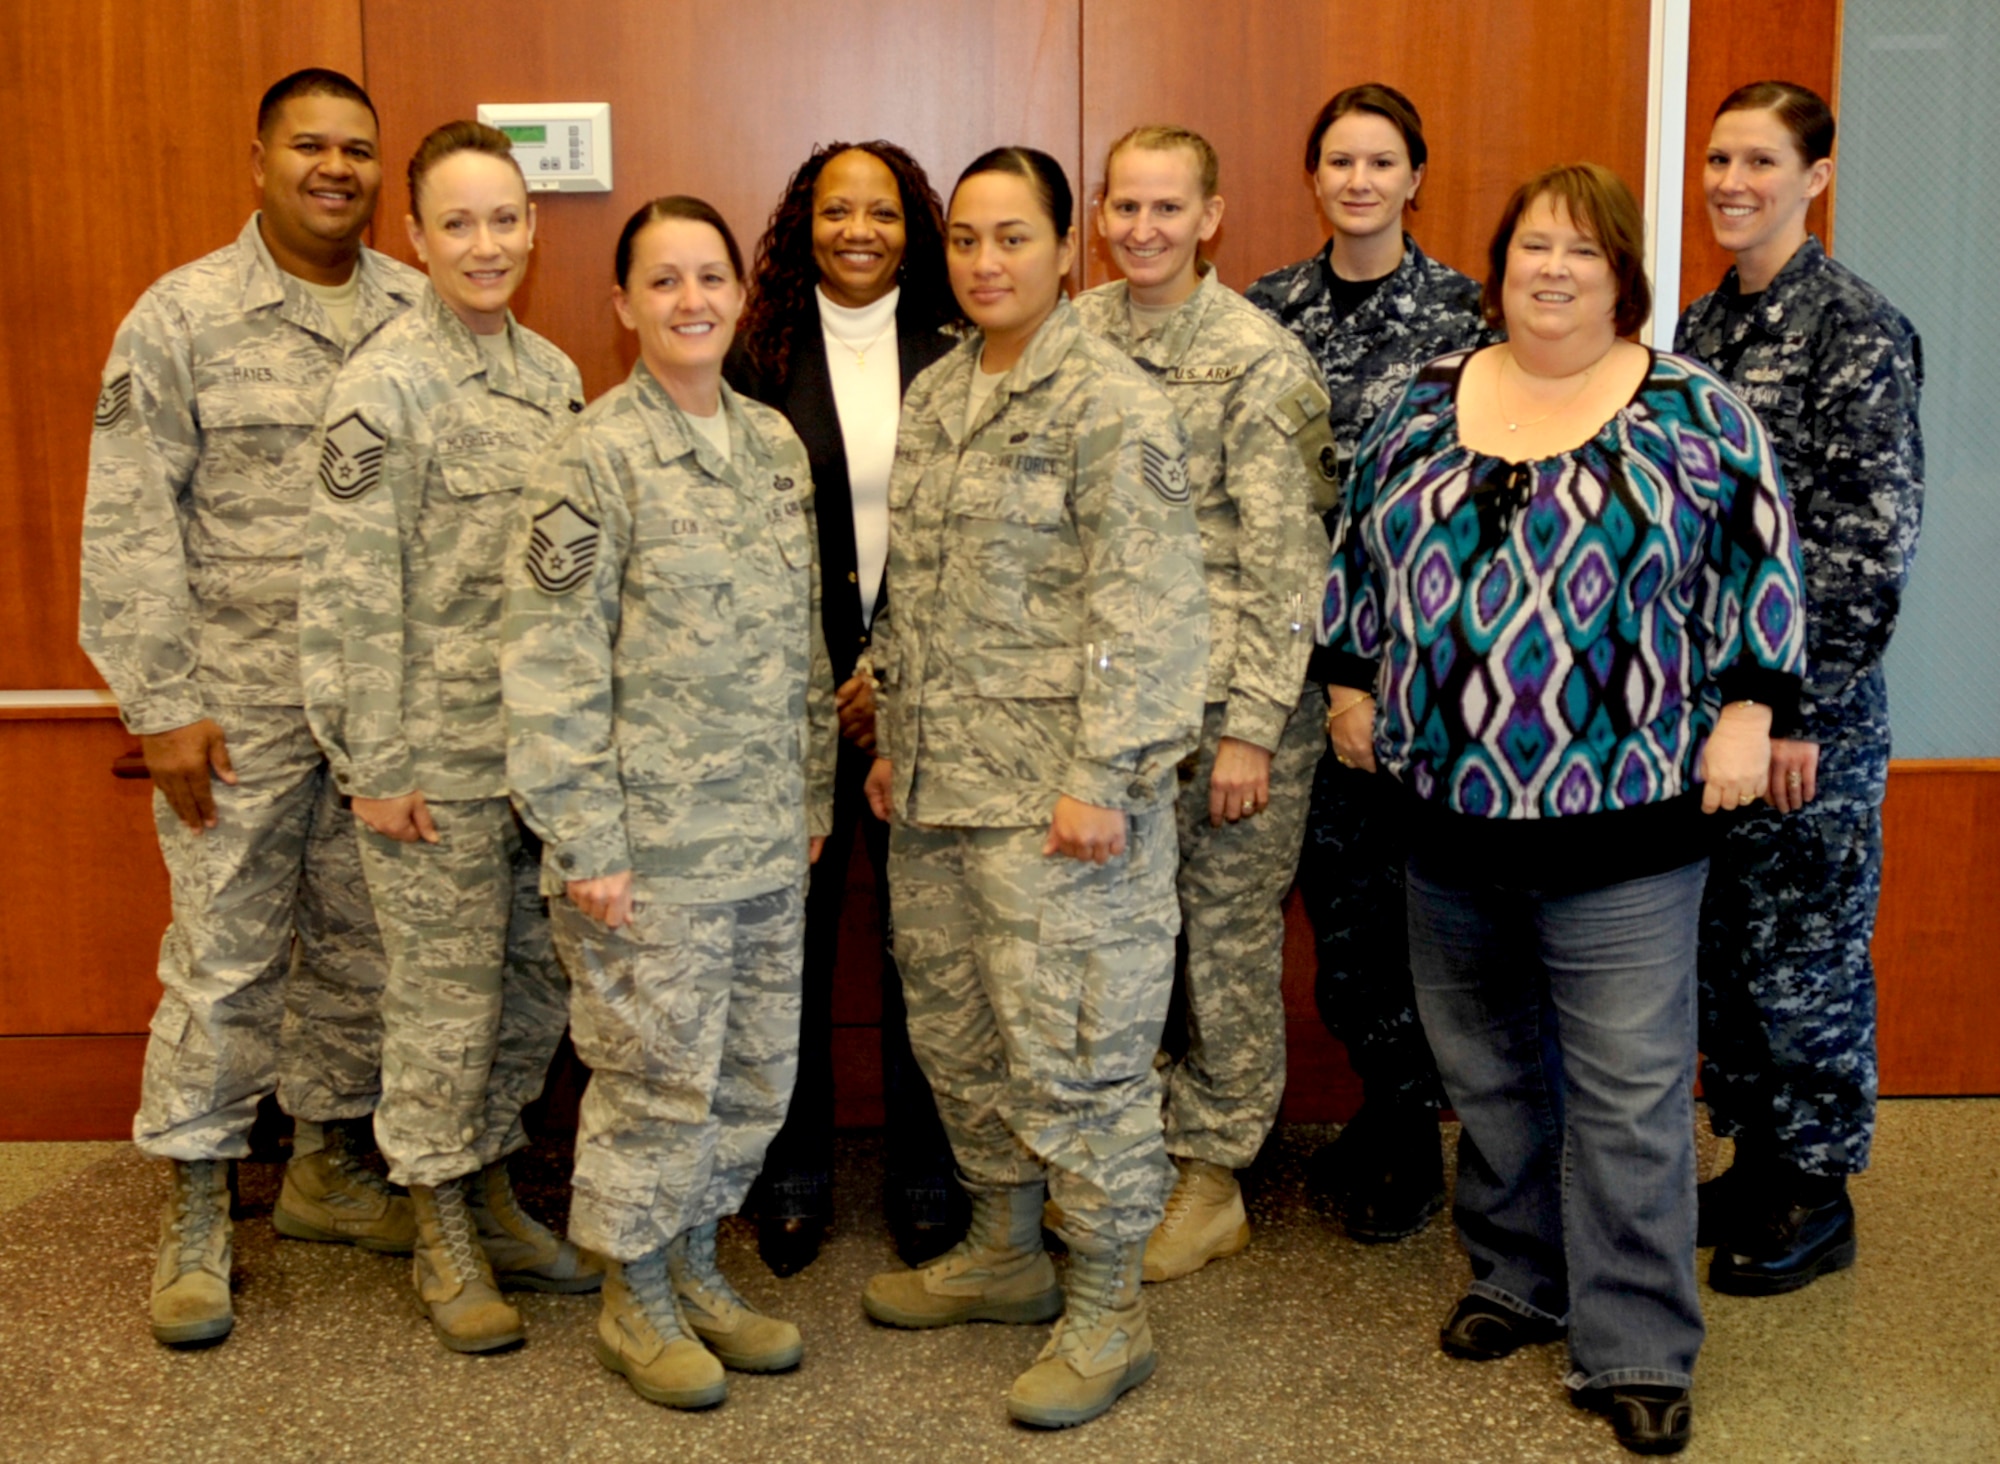 Buckley Victim Advocates Tech. Sgt. John Hayes, Master Sgt. Lisamichelle Hughes-Belt, Master Sgt. Karen Cain, Ms Peggy Moore-McCoy,TSgt Annie Fernandez, Maj. Alisa Englert, Petty Officer 1st Class Amanda McNeely, Ms. Tammy Jordan, Petty Officer 1st Class Erika Burrell pose for a photo on Nov 5, 2010. (Air Force Photo by Airman First Class Paul Labbe.)
